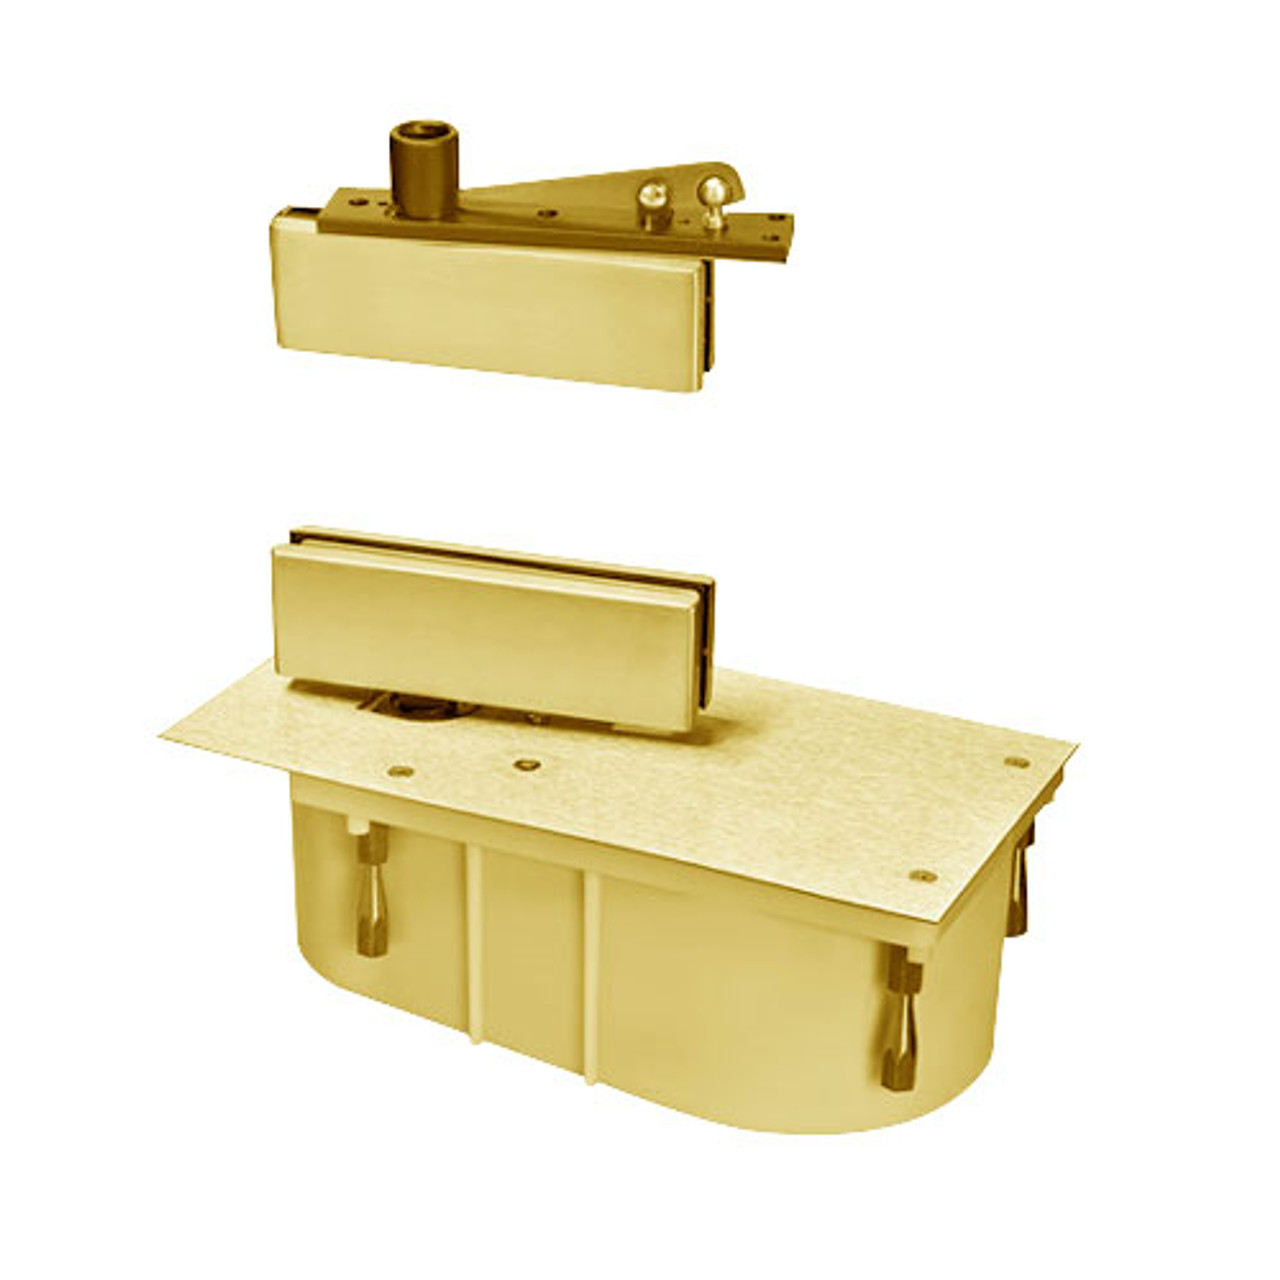 428-105S-LTP-LH-605 Rixson 428 Series Heavy Duty Single Acting Center Hung Floor Closer with Patch Fittings in Bright Brass Finish